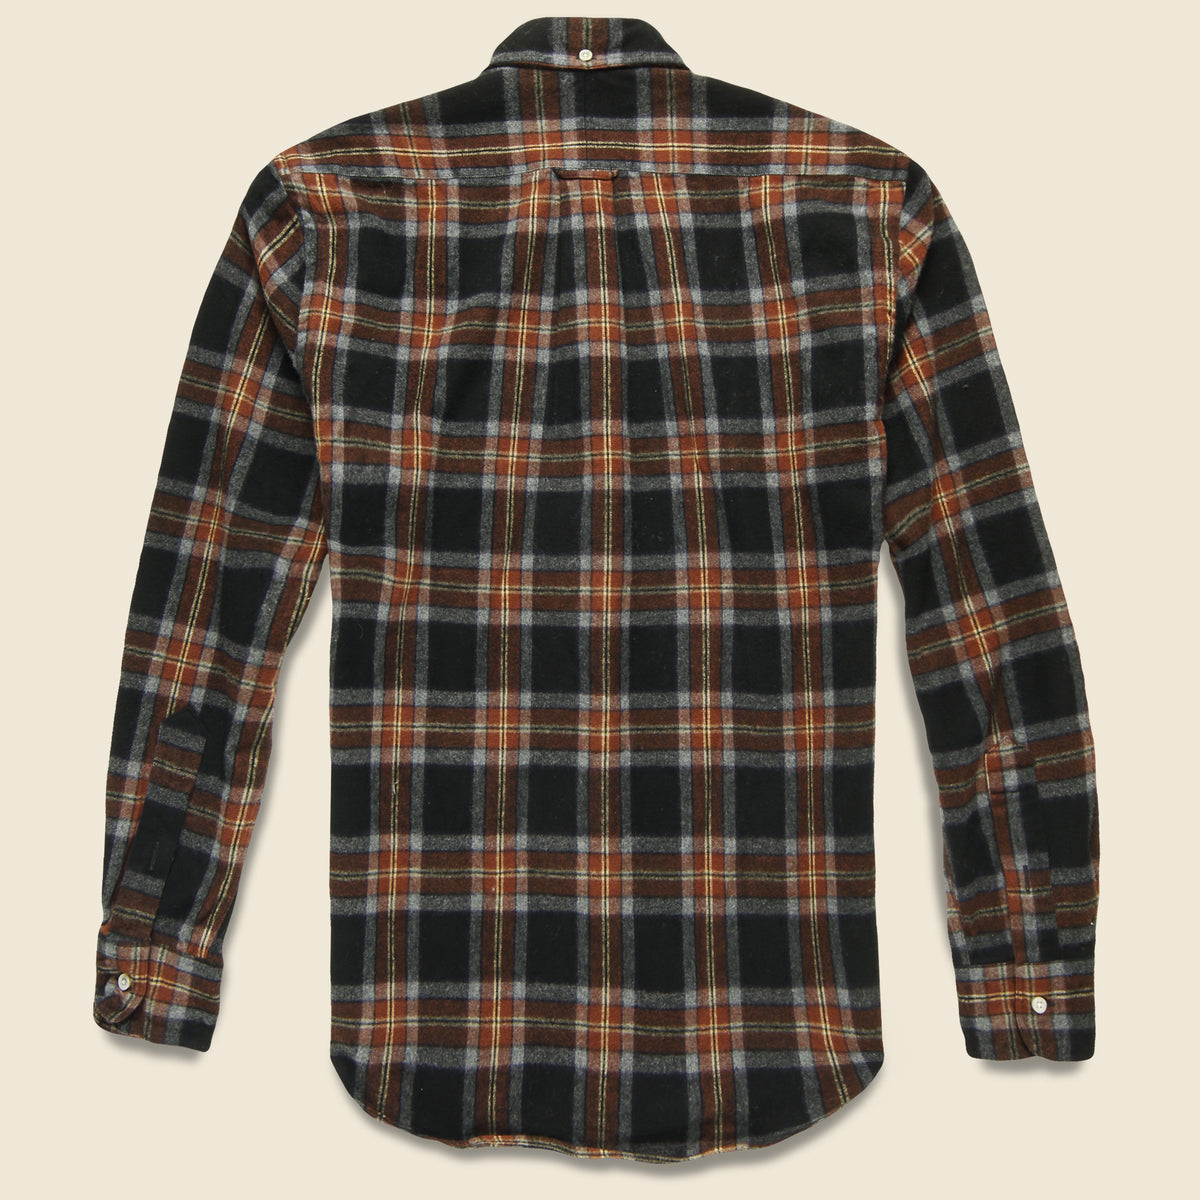 Shaggy Brushed Flannel Oxford Shirt - Rust/Black